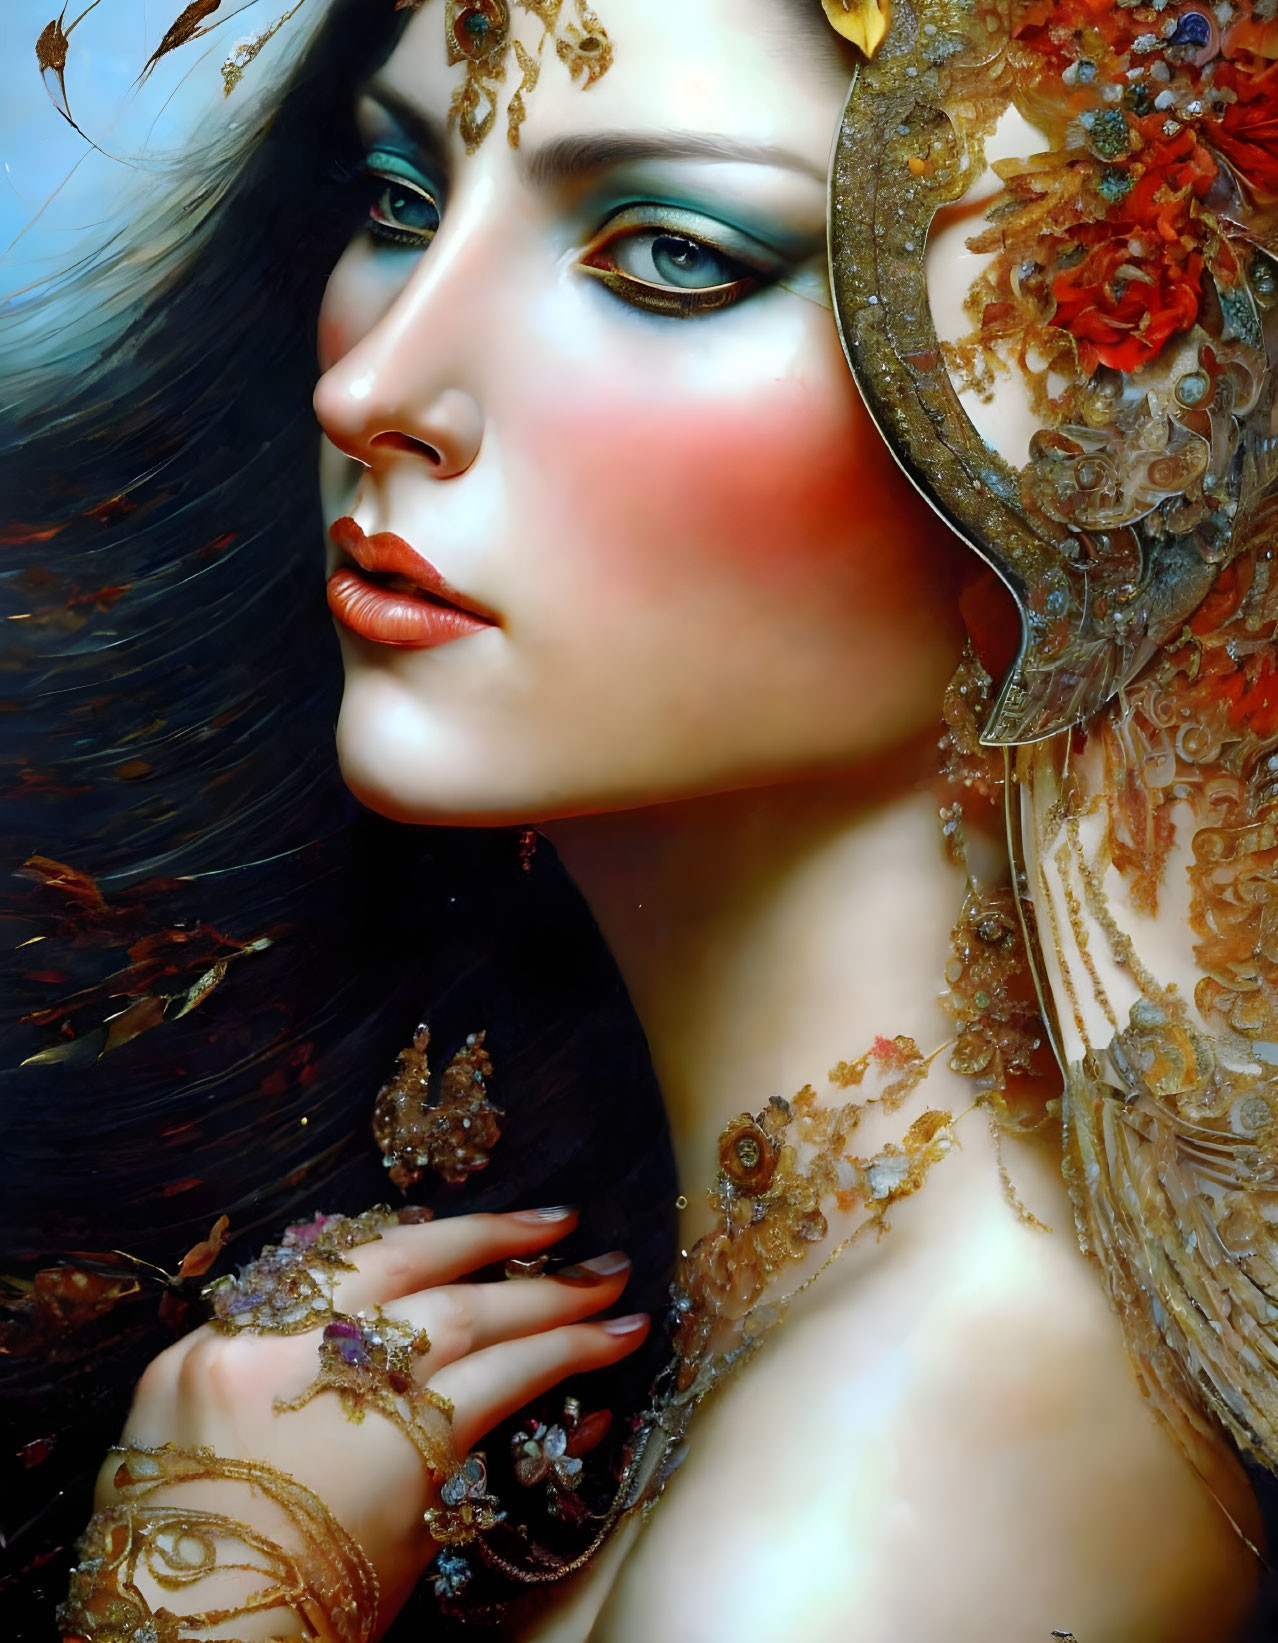 Detailed fantasy portrait of woman with ornate headpiece, vibrant makeup, and decorative motifs on skin against